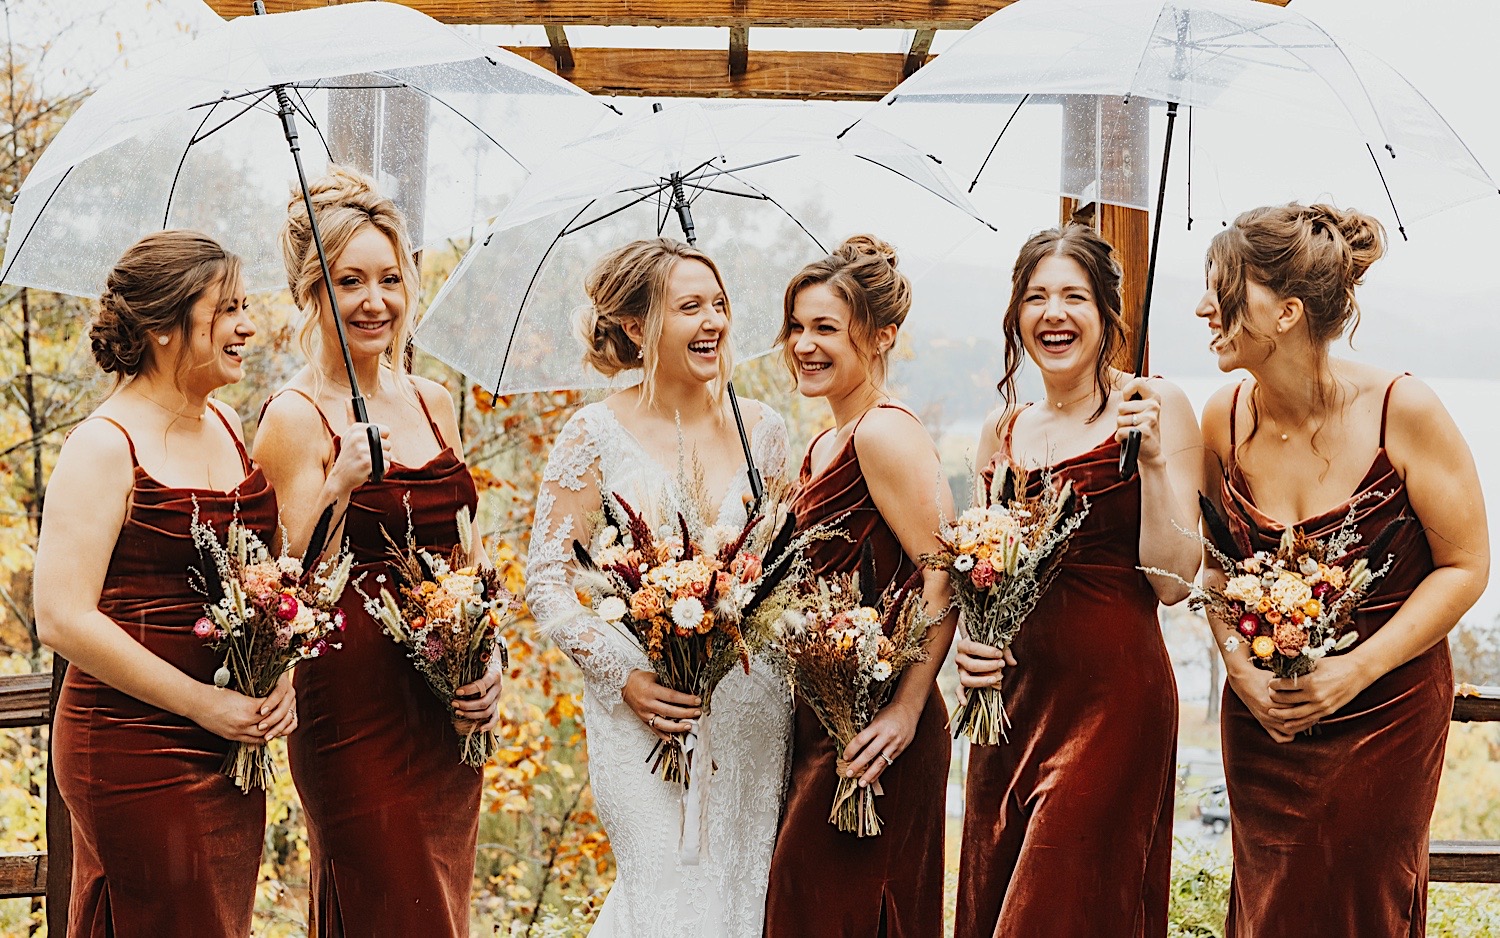 A bride laughs alongside her 5 bridesmaids while they take portrait photos in the rain at the outdoor wedding ceremony space of Lake Bomoseen Lodge in Vermont